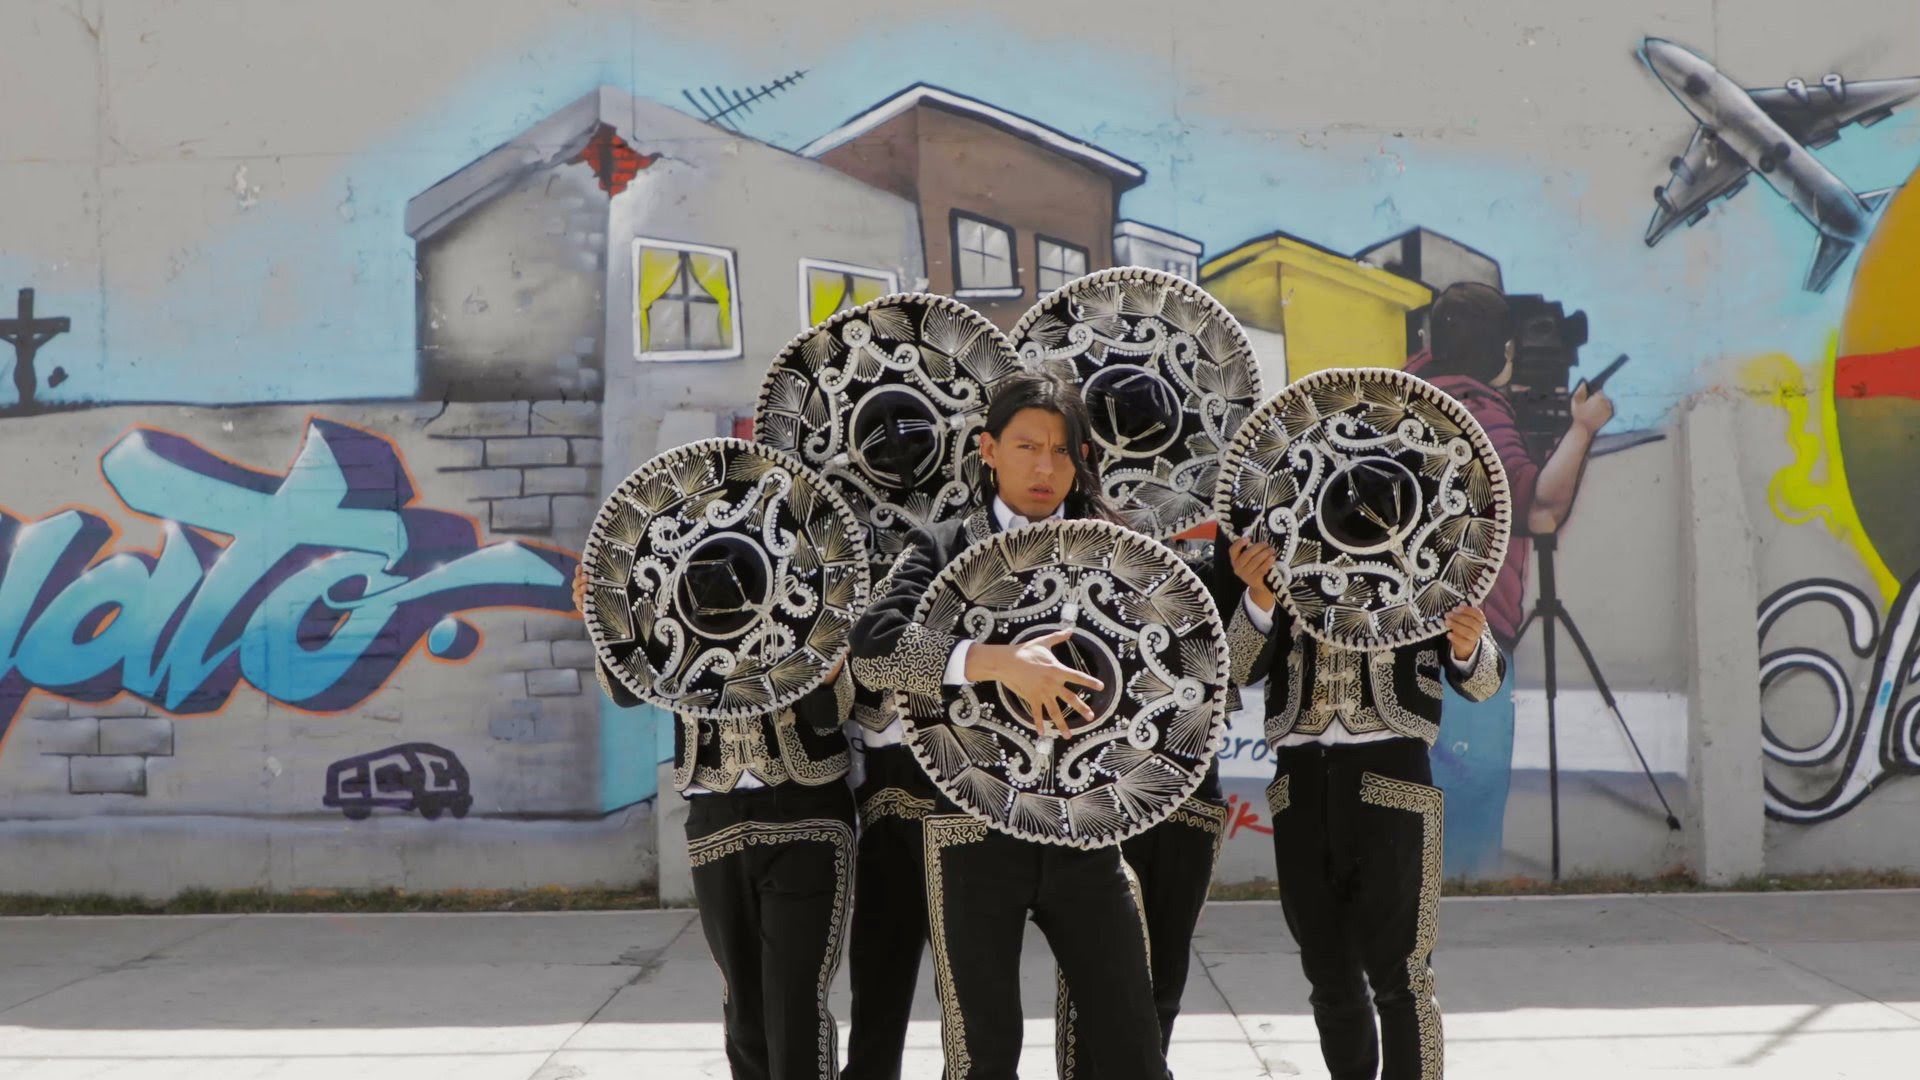 Five mariachis in front of a graffitied concrete wall.